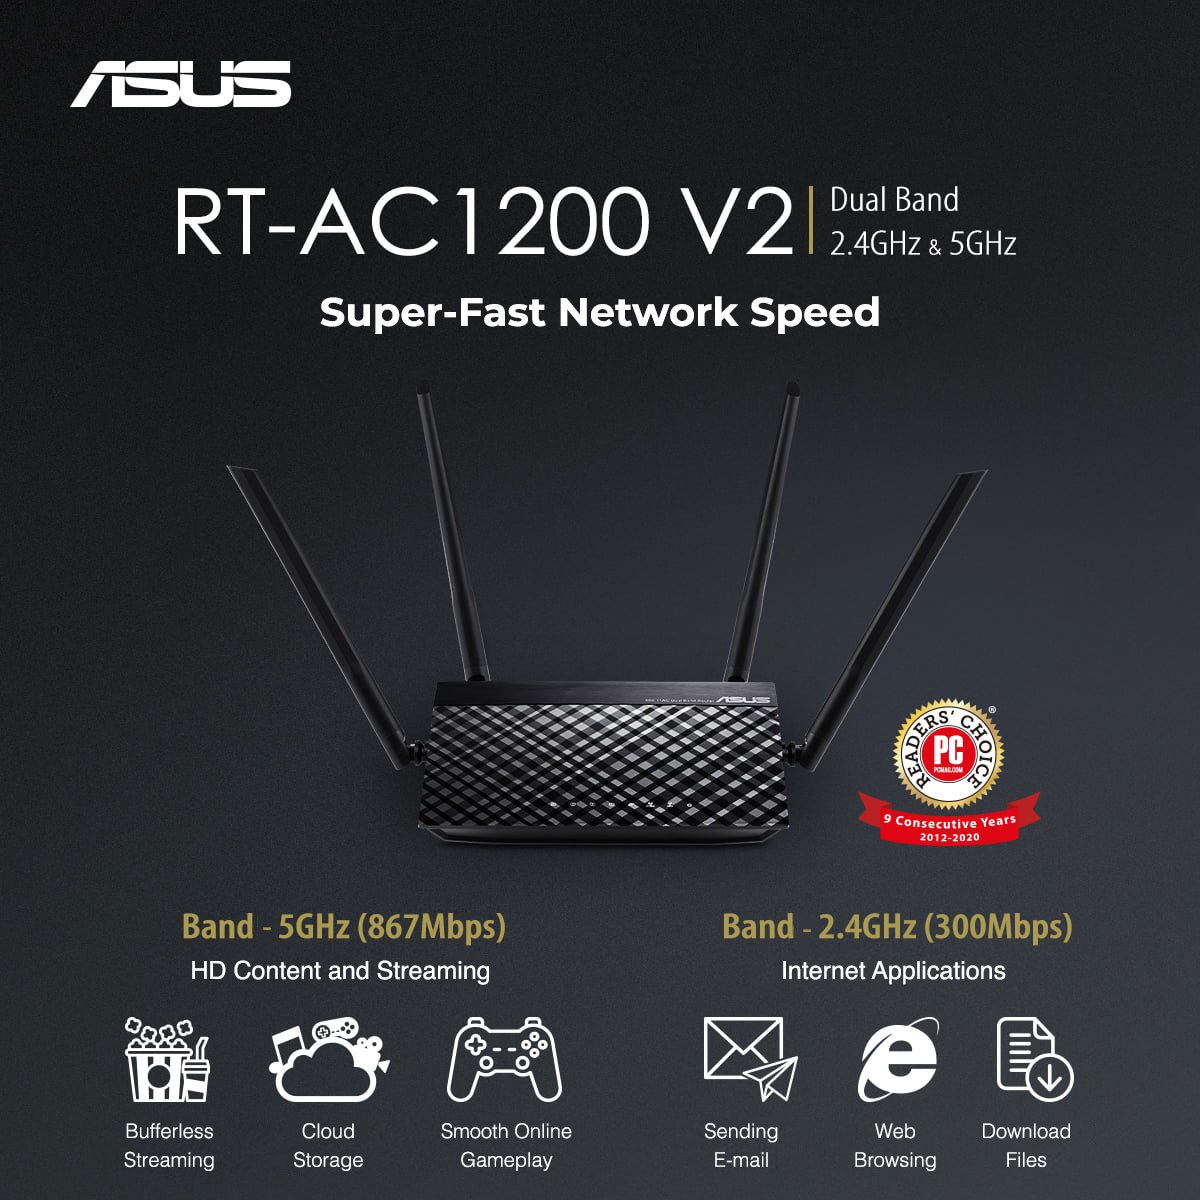 ASUS Router Bangladesh on Twitter: "ASUS RT-AC1200 V2 Wi-Fi Router helps to improve Wi-Fi signal connection, device prioritization, and network management Router App. #Asus #AC1200 #hdstreaming #OnlineGamePlay https://t.co/xkF8873Dvu"